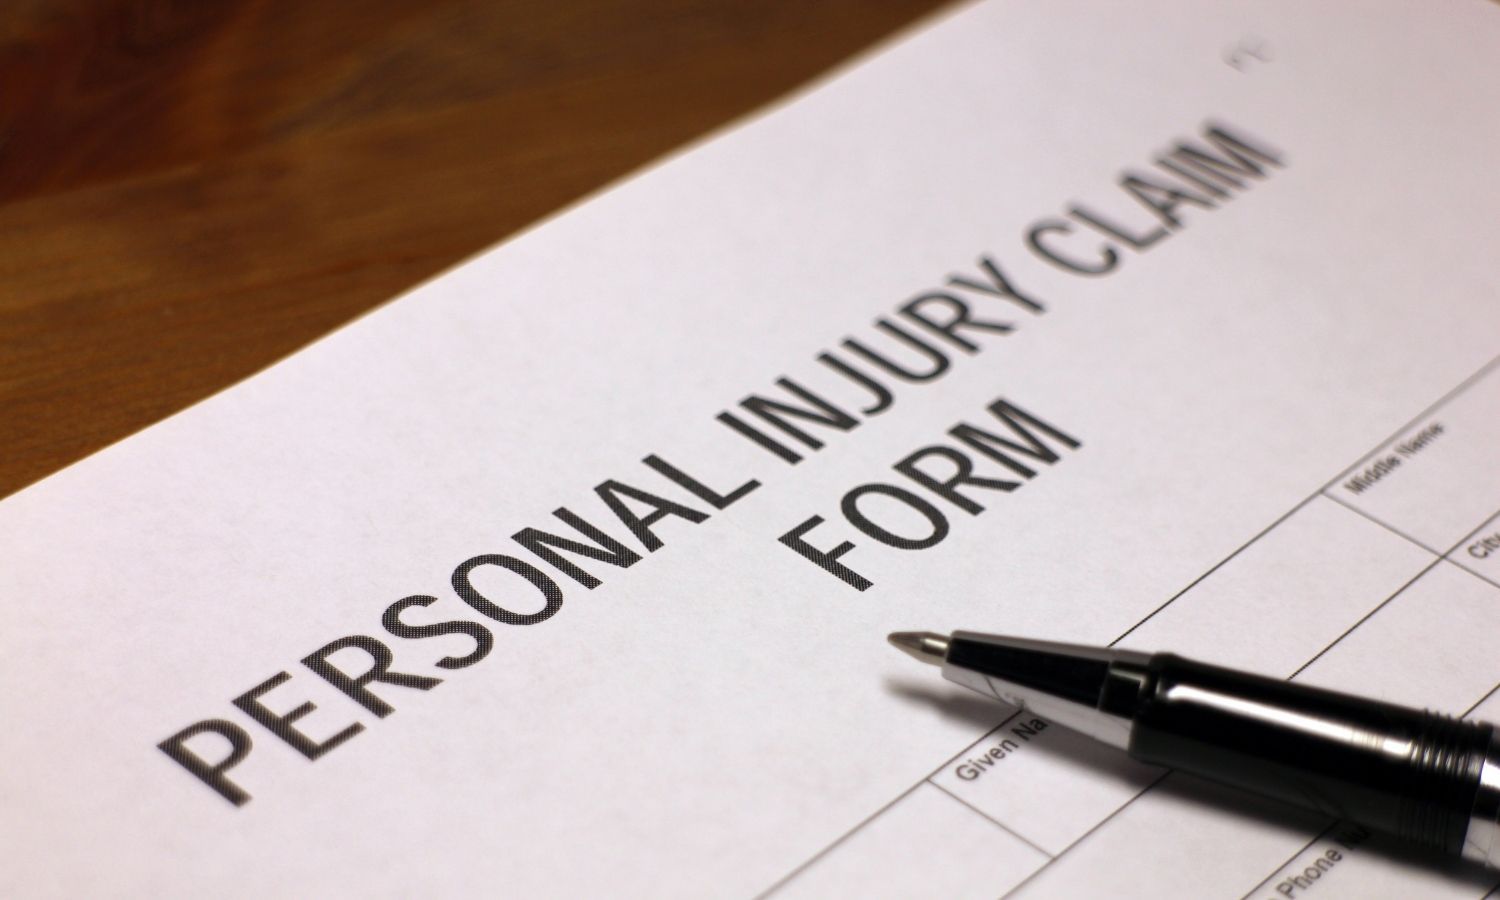 I Haven’t Sought Medical Treatment; Can I Still Make A Personal Injury Claim?